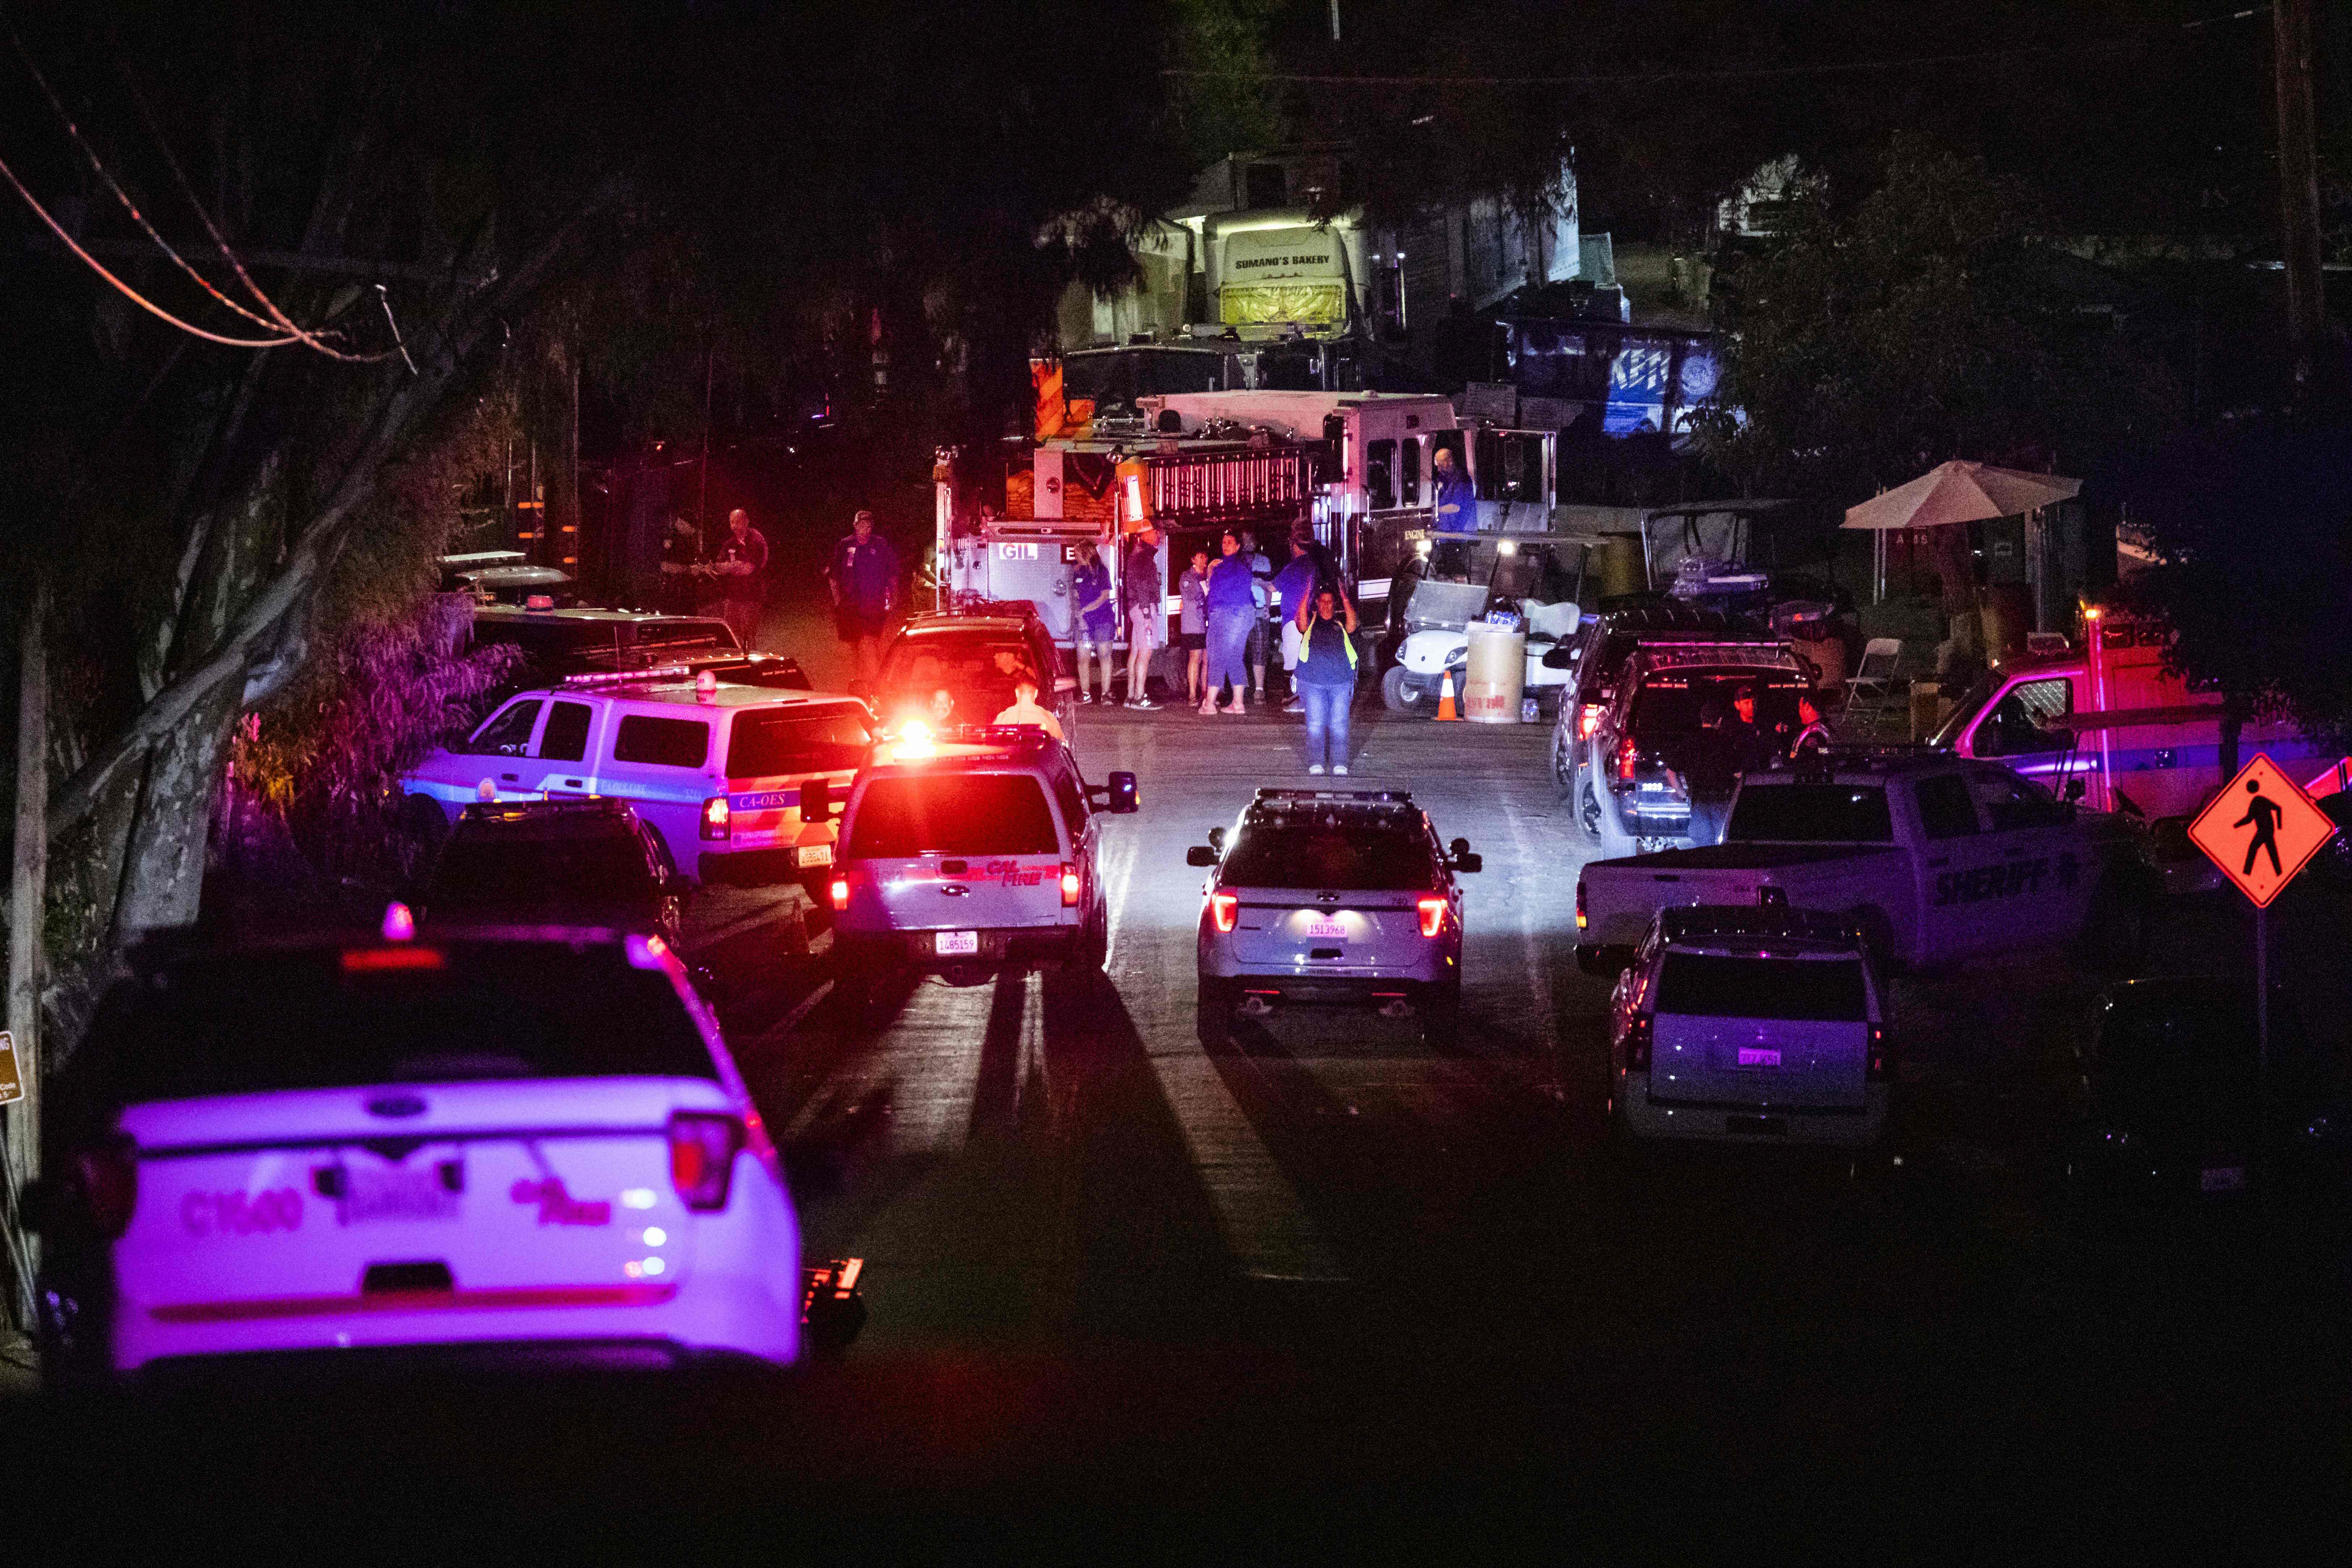 Police vehicles arrive on the scene of the investigation following a deadly shooting at the Gilroy Garlic Festival in Gilroy, 80 miles south of San Francisco, California on July 28, 2019. (PHILIP PACHECO/AFP/Getty Images)